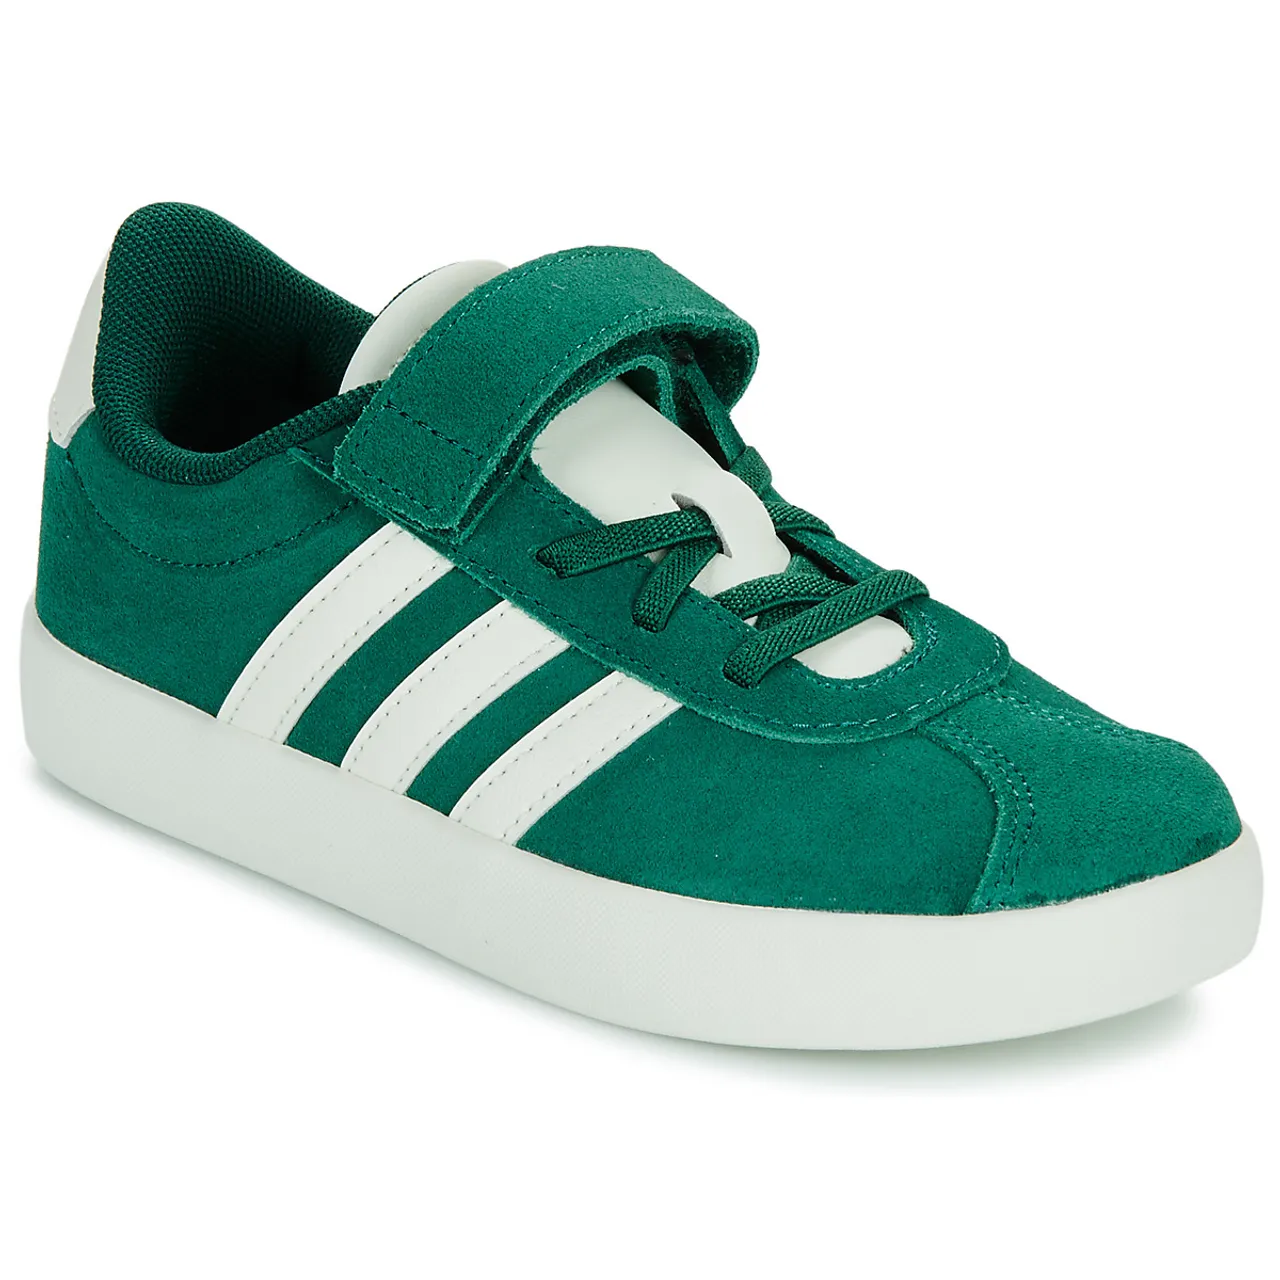 adidas  VL COURT 3.0 EL C  girls's Children's Shoes (Trainers) in Green